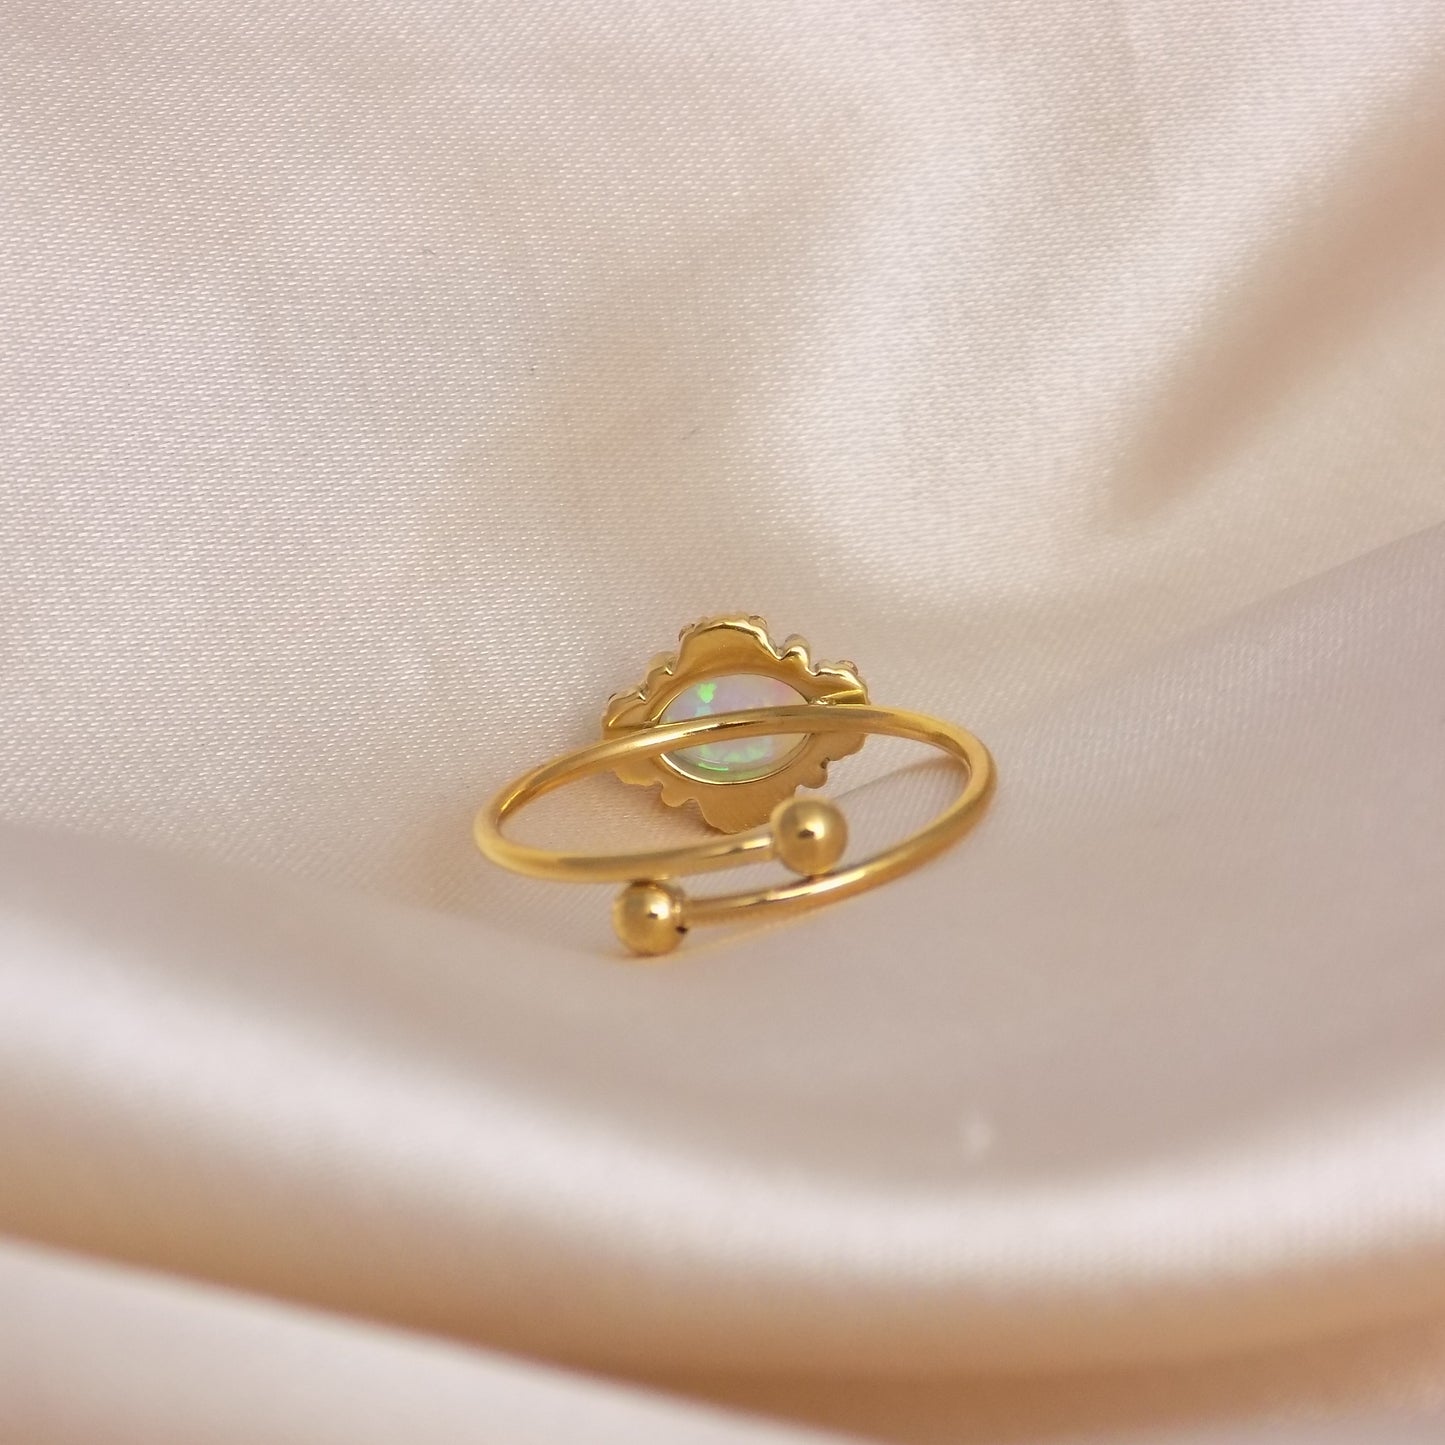 Oval Opal Ring Gold Adjustable with Cubic Zirconia Accent - Minimalist Jewelry